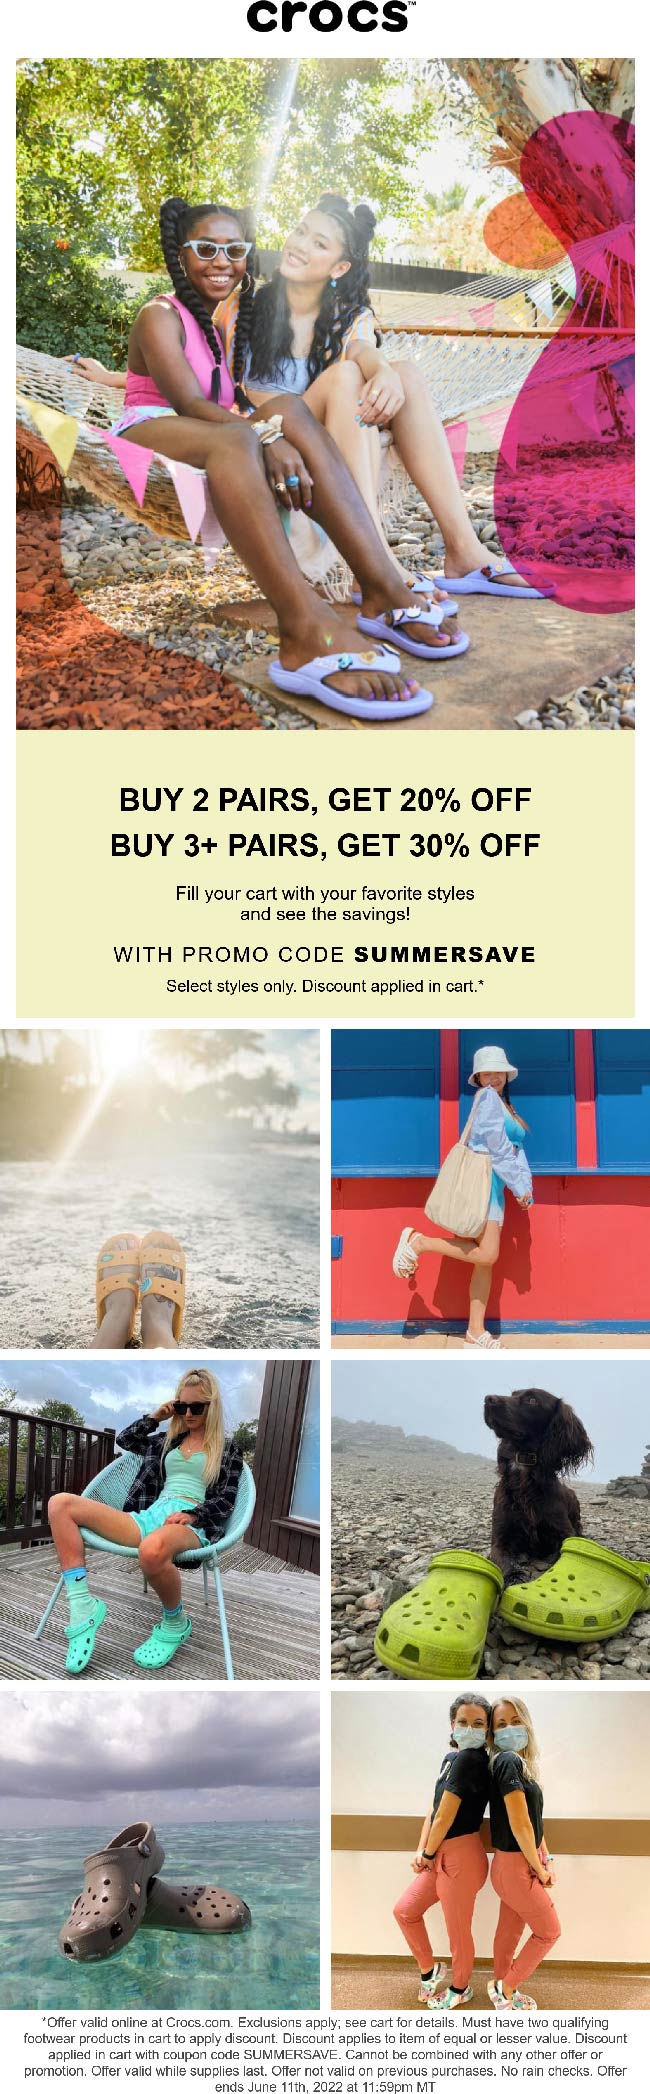 Crocs coupons & promo code for [December 2022]